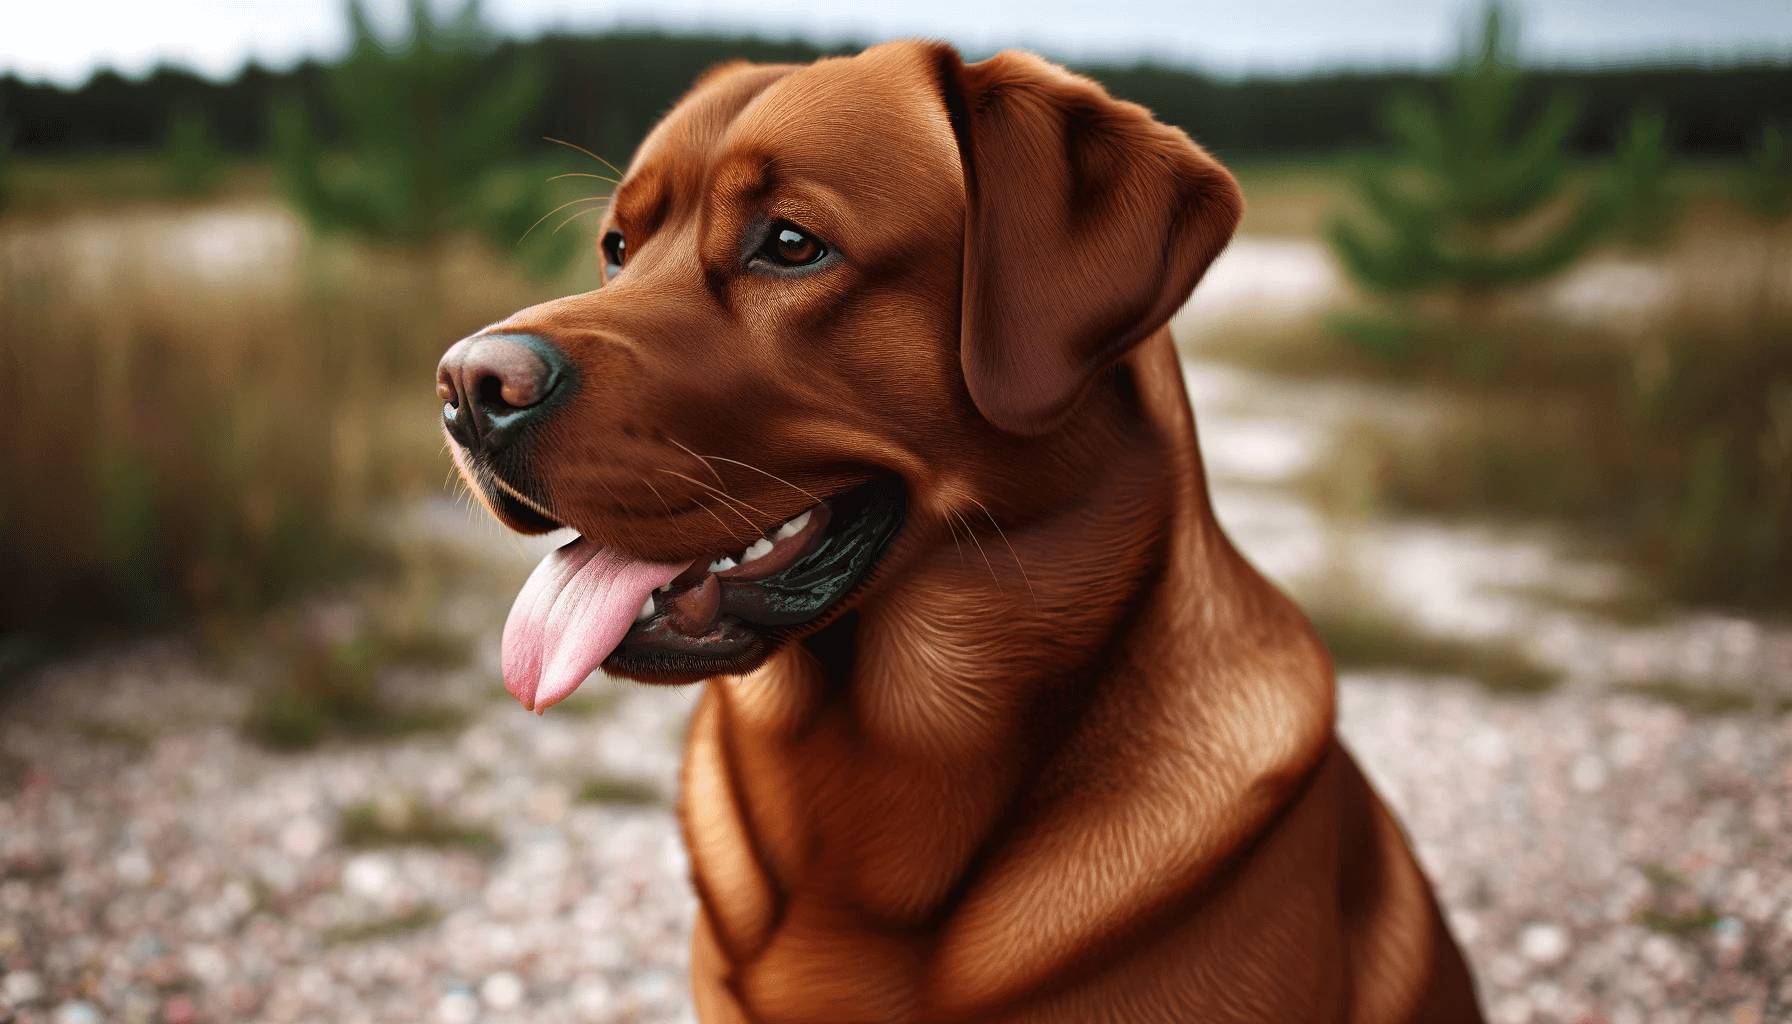 Red Fox Labrador sitting outdoors captured from the side angle showing the profile of the dog with a shiny reddish-brown coat